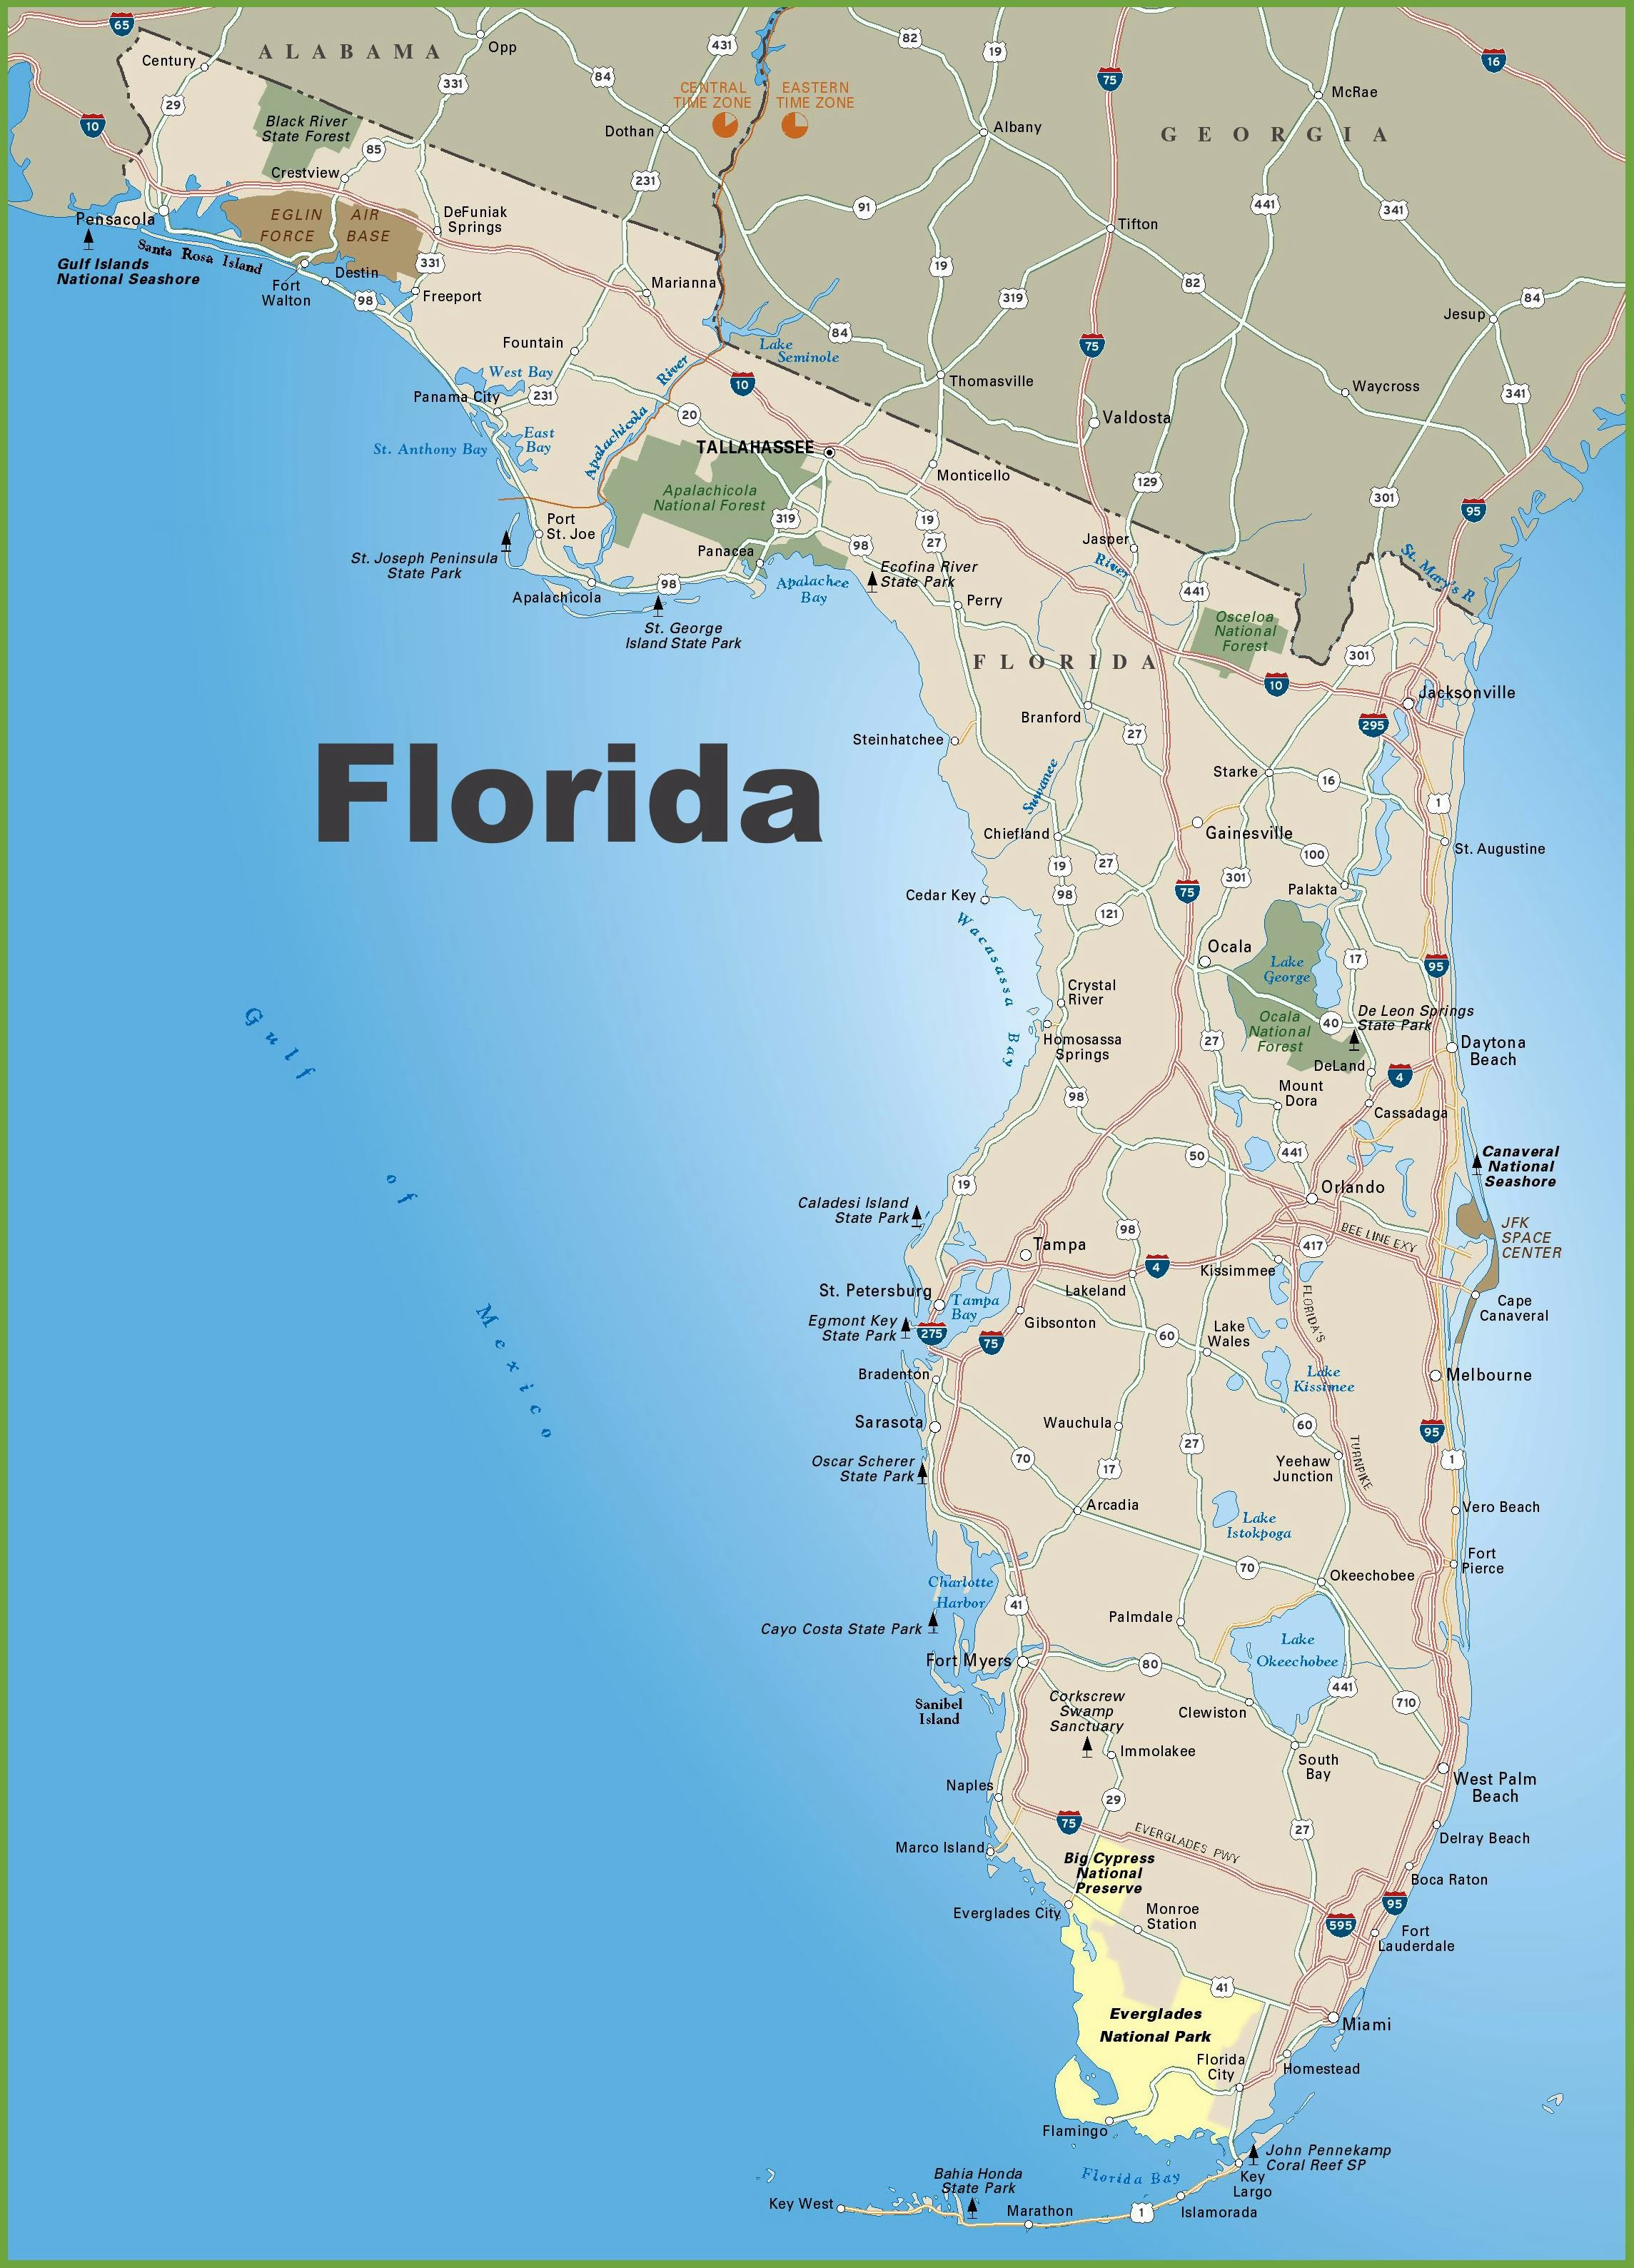 Large Florida Maps For Free Download And Print | High-Resolution And - Bowling Green Florida Map